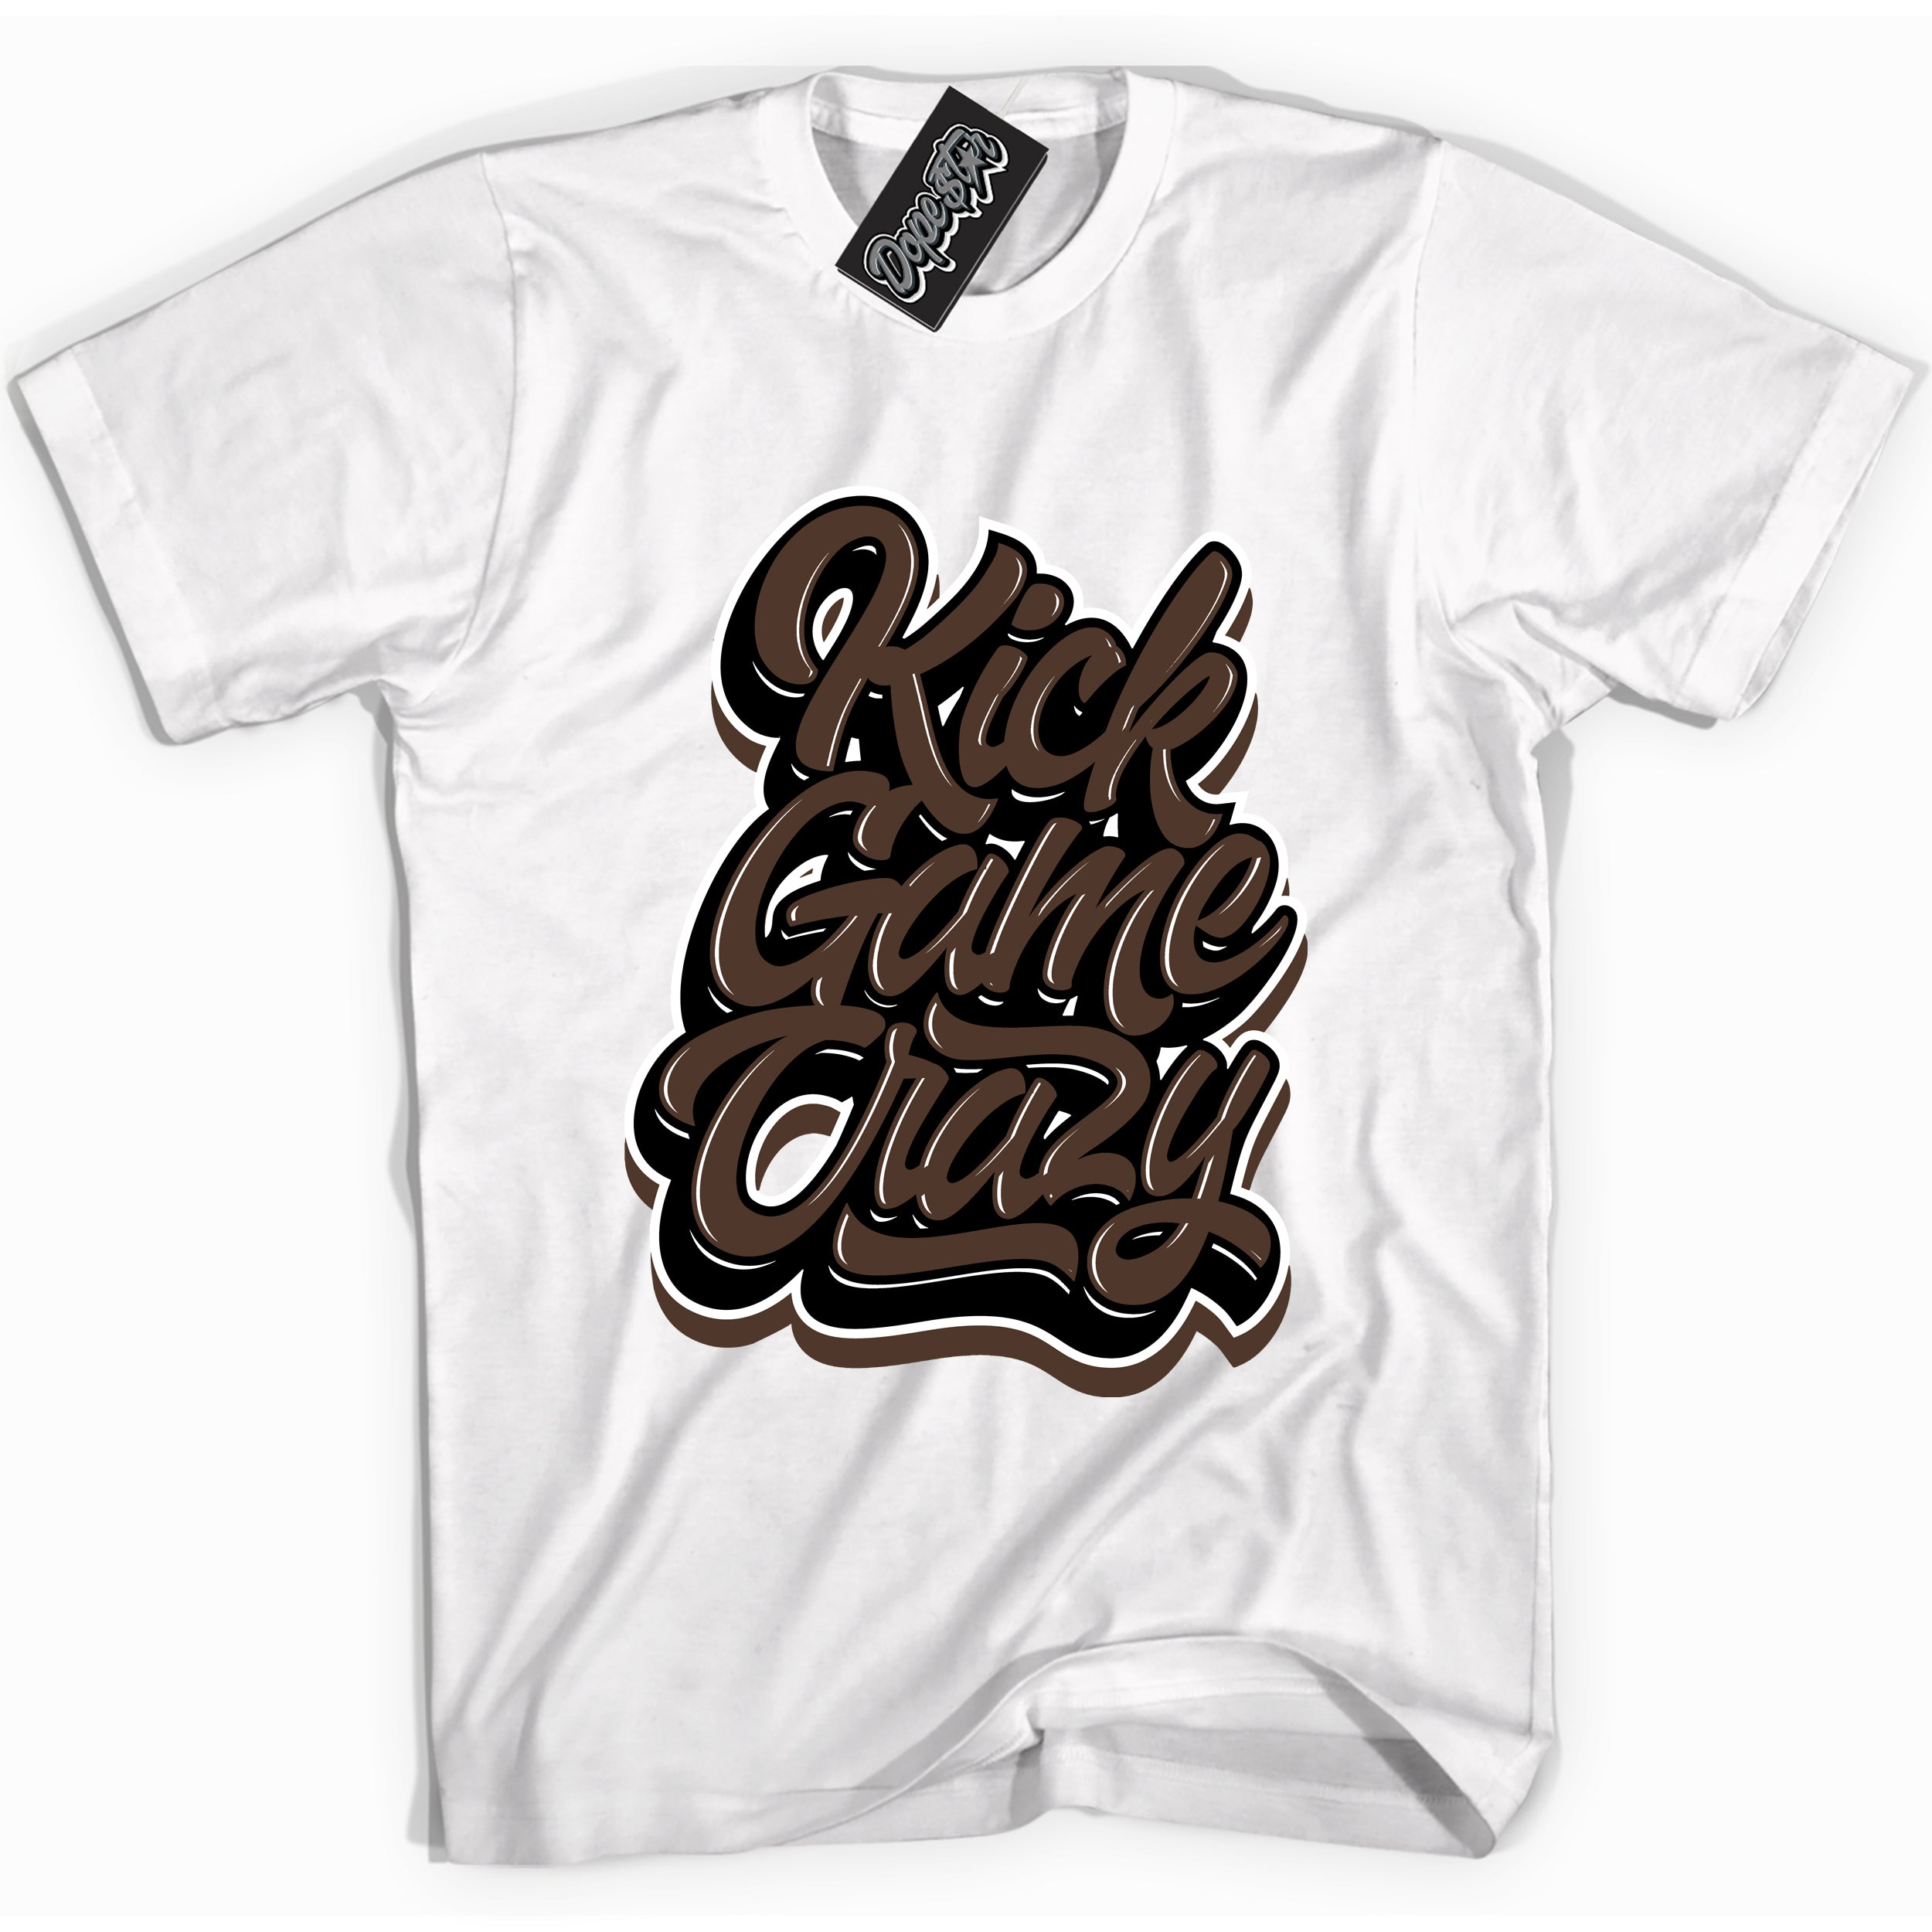 Cool White graphic tee with “ Kick Game Crazy ” design, that perfectly matches Palomino 1s sneakers 